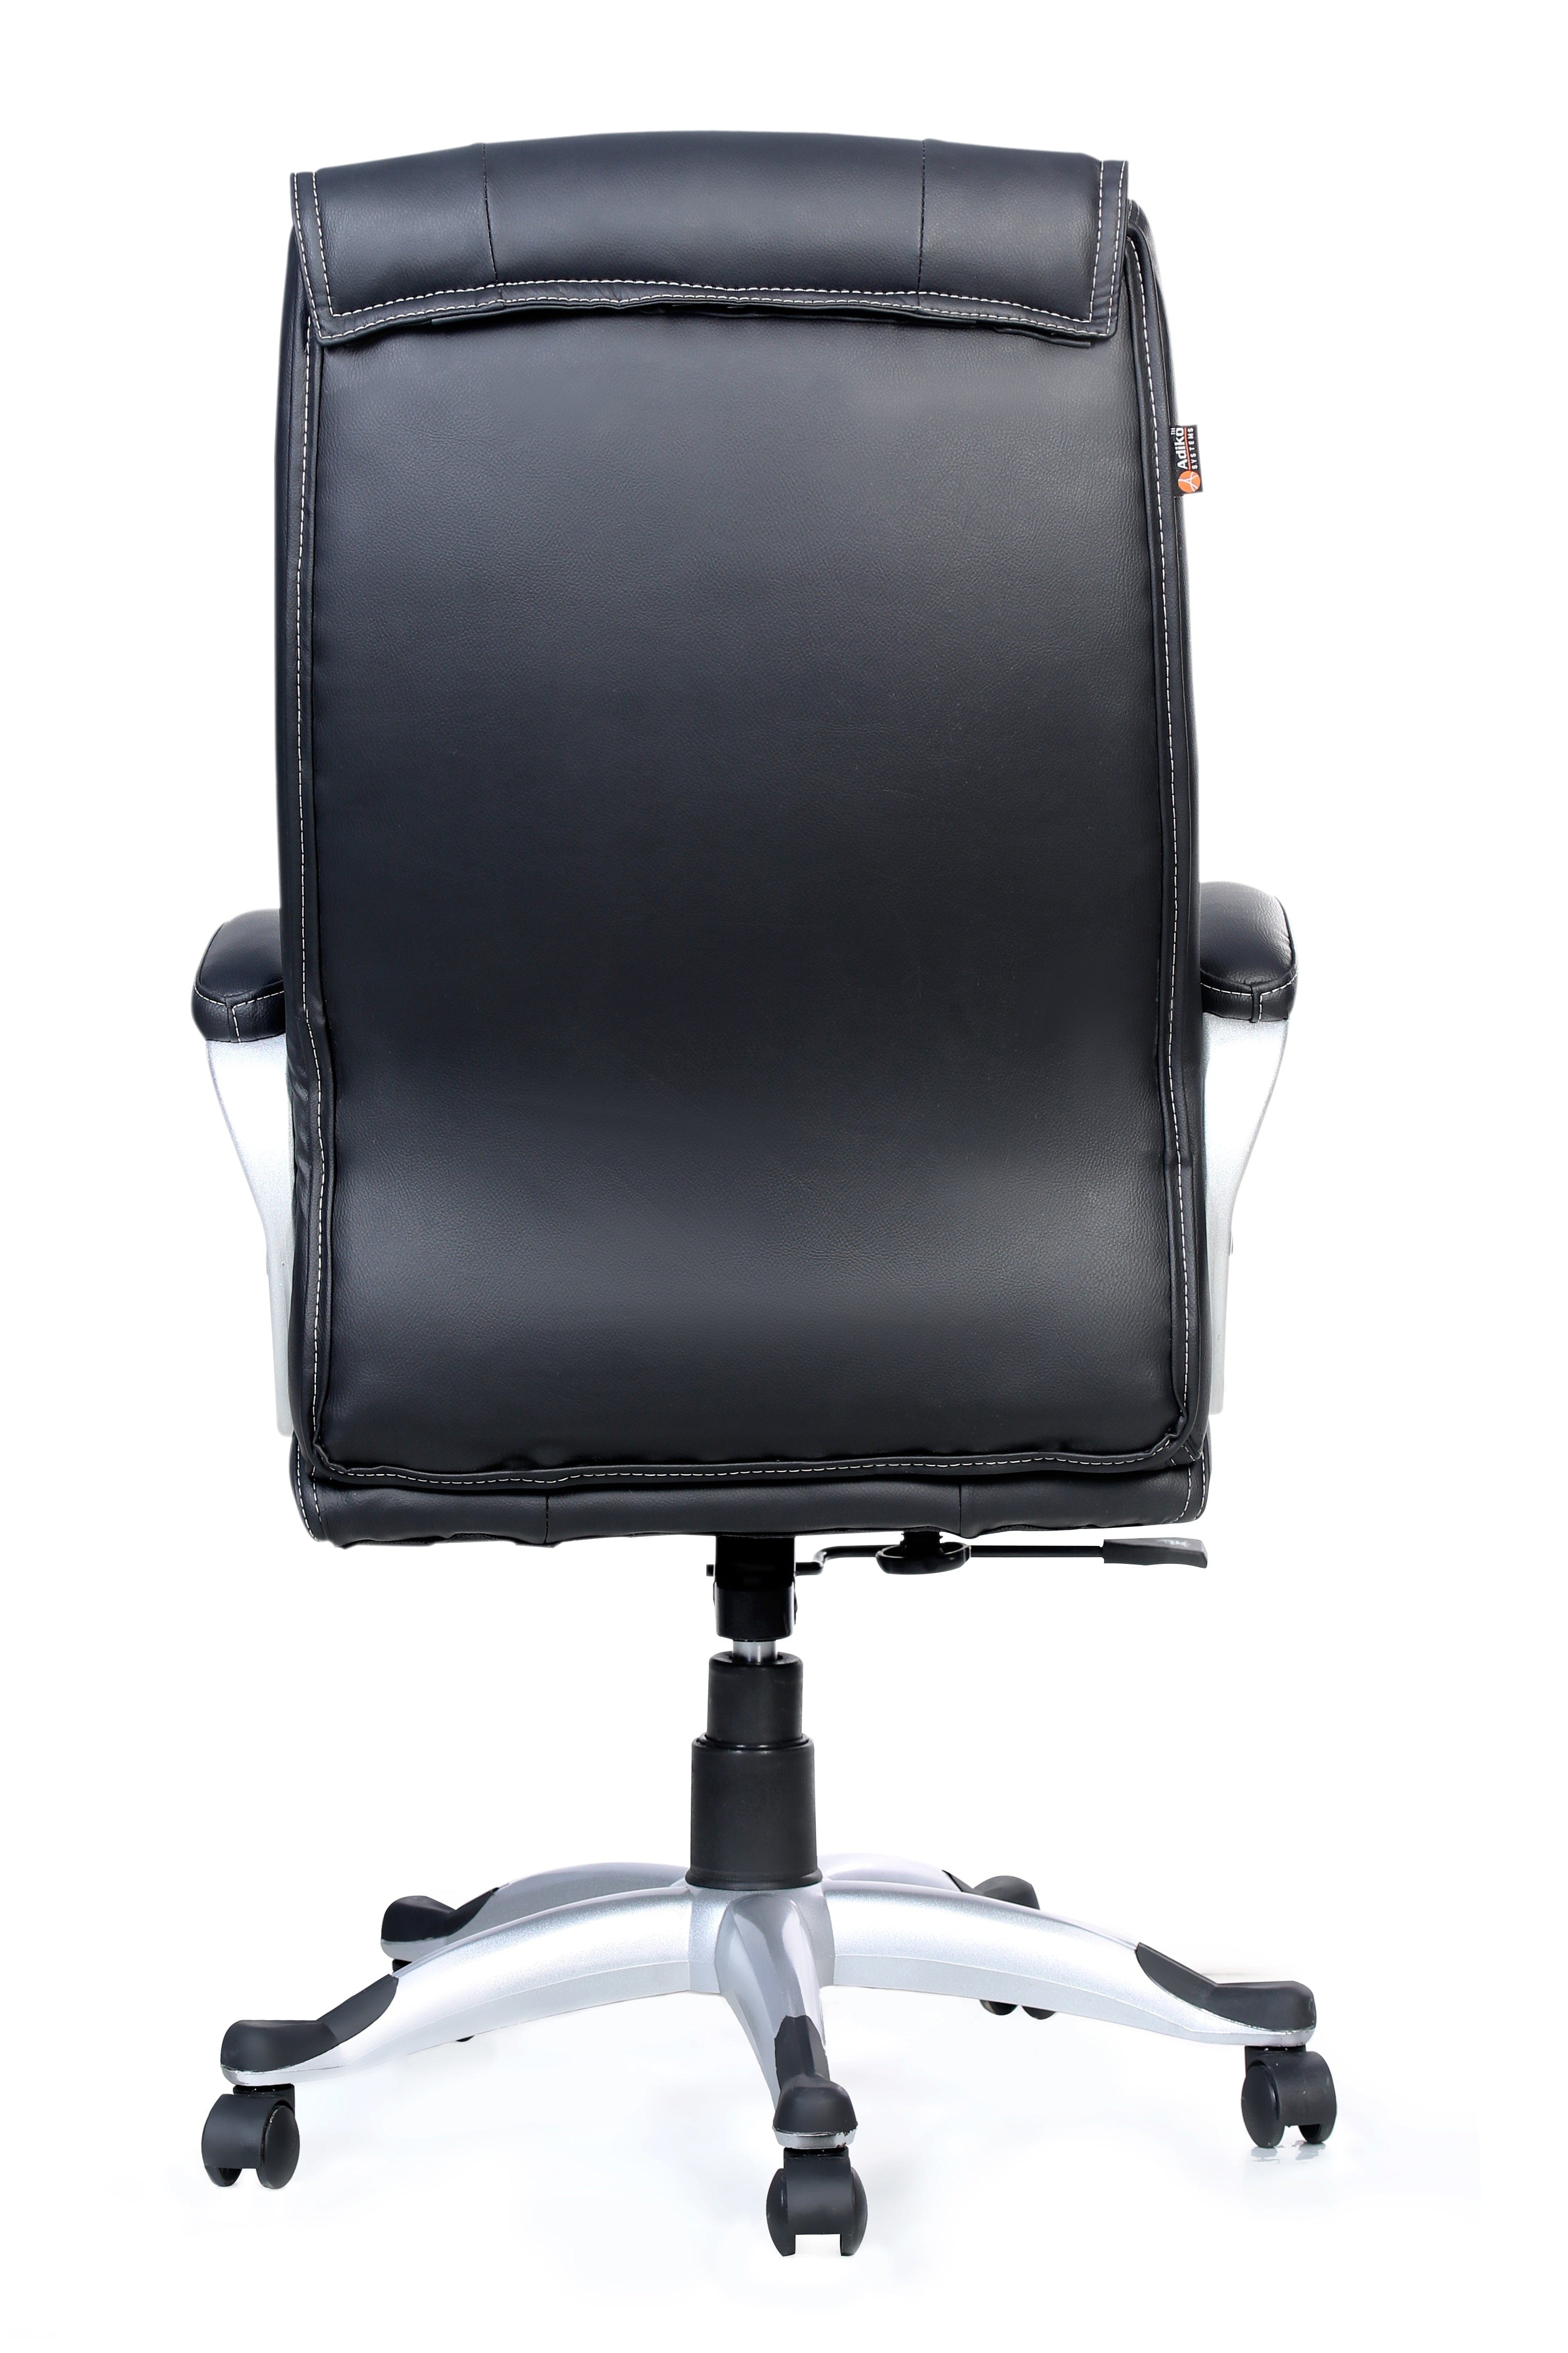 Executive Chair in Black Colour by Adiko Systems